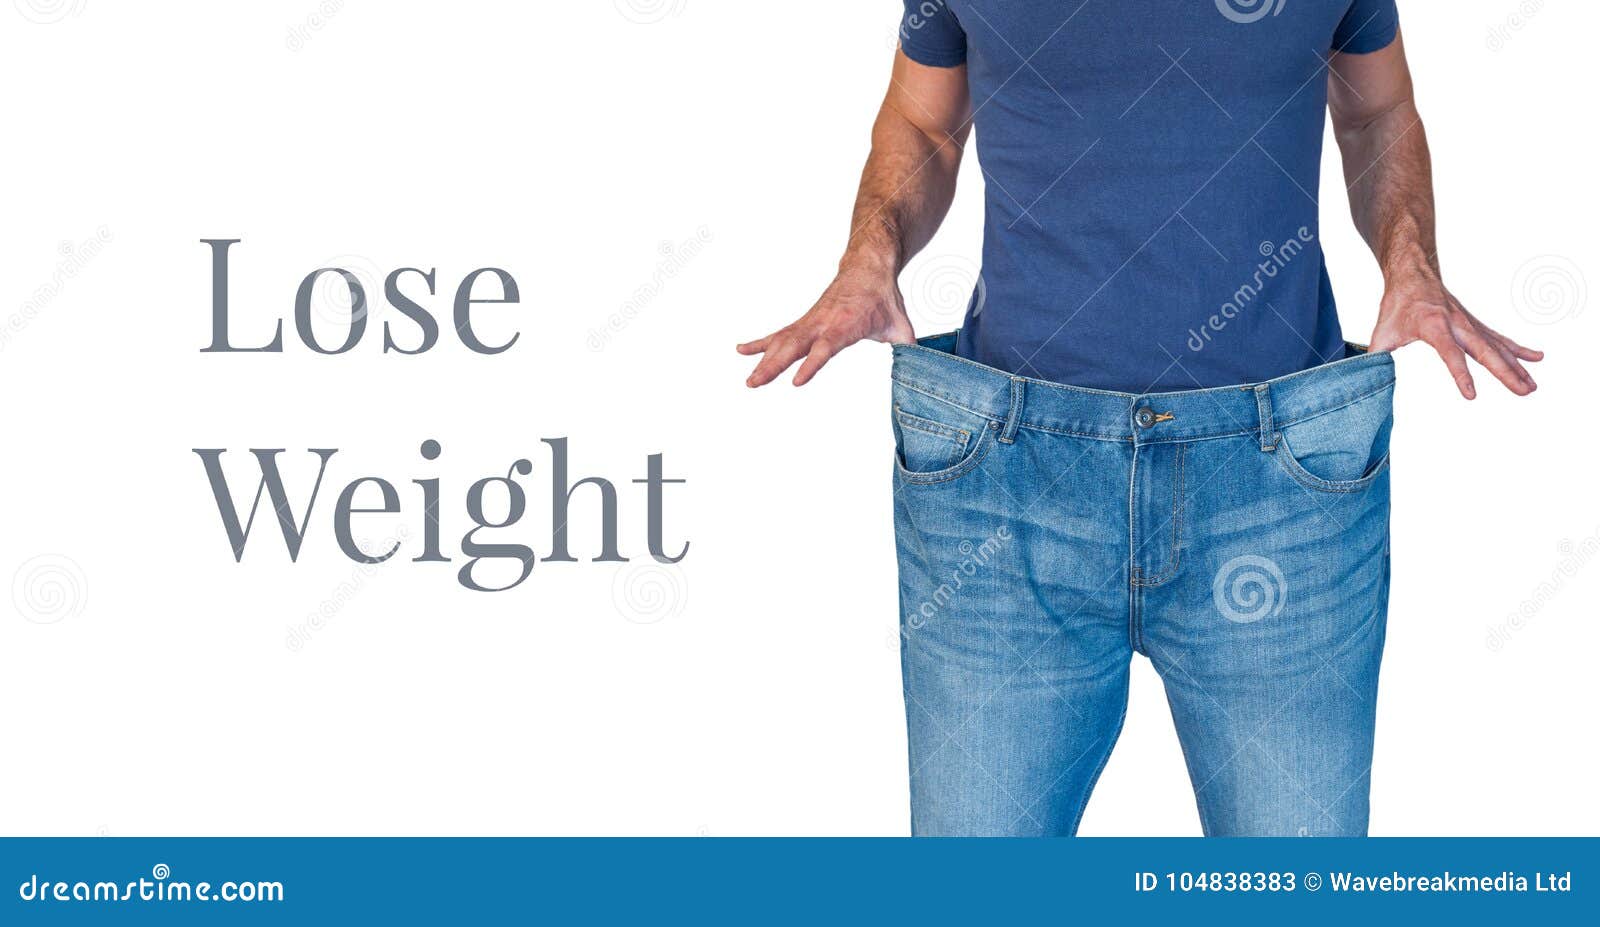 lose weight text and man with oversized jeans